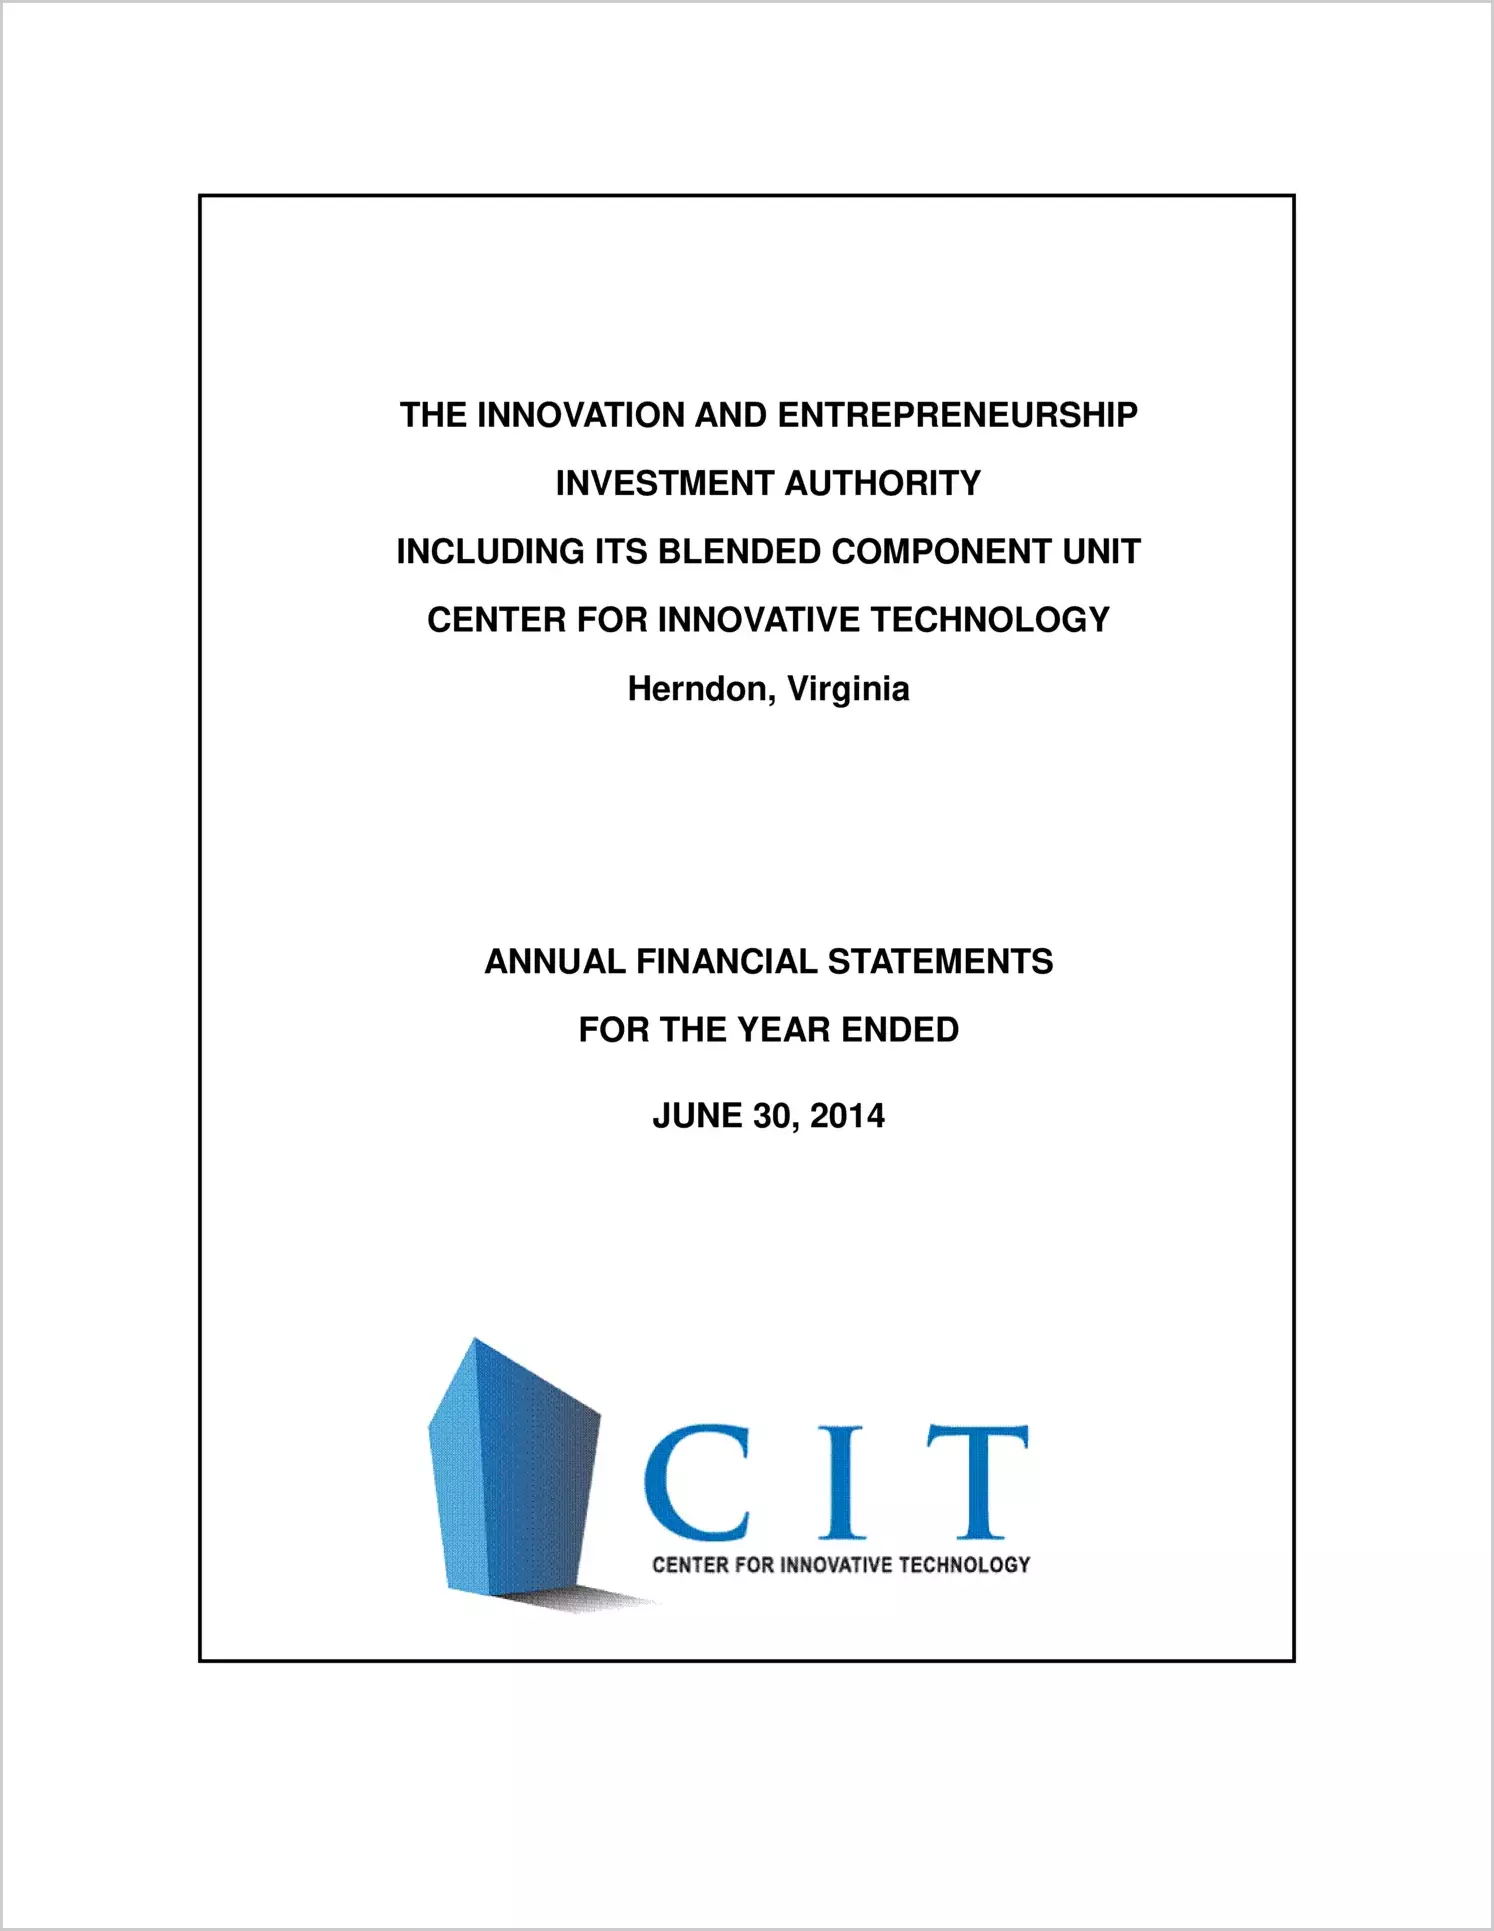 Innovation and Entrepreneurship Investment Authority Including Its Blended Component Unit Center for Innovative Technology Financial Statement Report for the year ended June 30, 2014